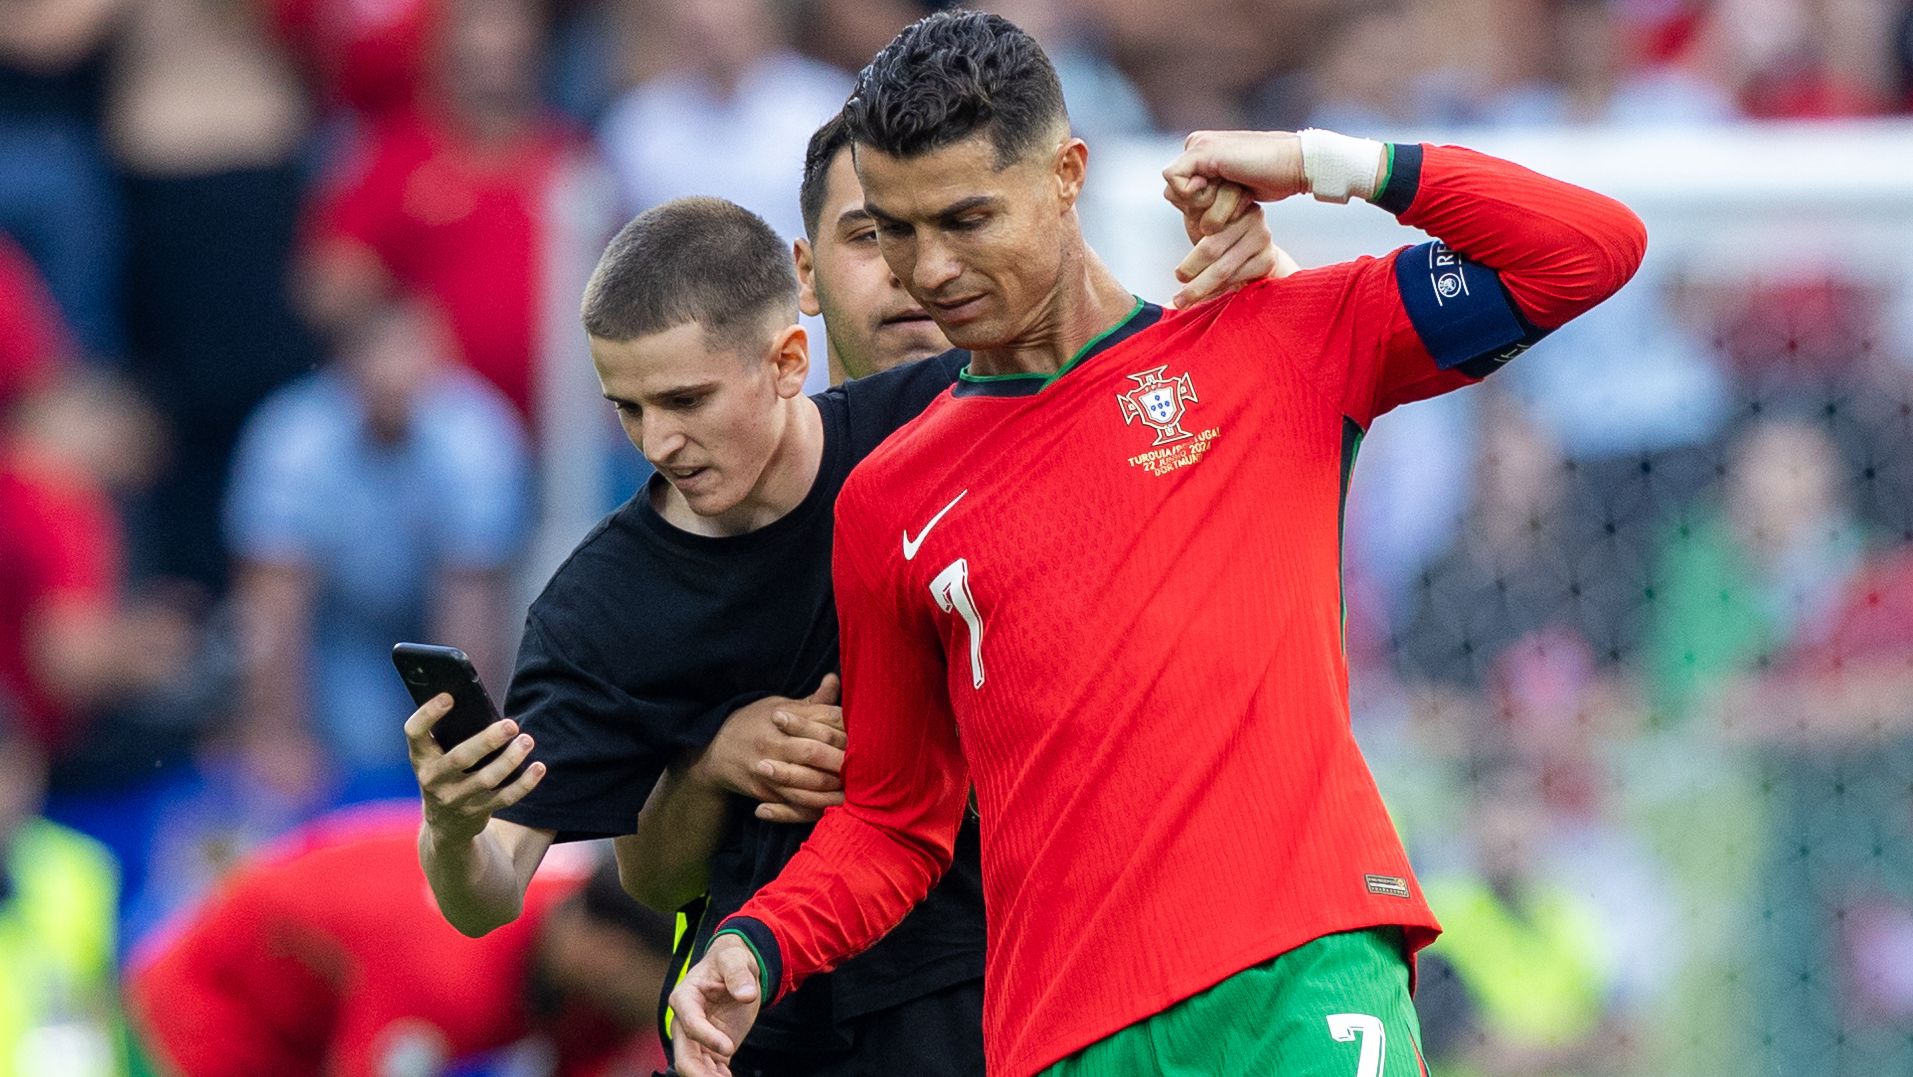 A pitch invader takes a selfie photograph with Portugal forward Cristiano Ronaldo during the UEFA Euro 2024 Group F match between Turkiye v Portugal, at the  BVB Stadion Dortmund in Dortmund, Germany, on June 22, 2024. (Photo by Andrzej Iwanczuk/NurPhoto via Getty Images)